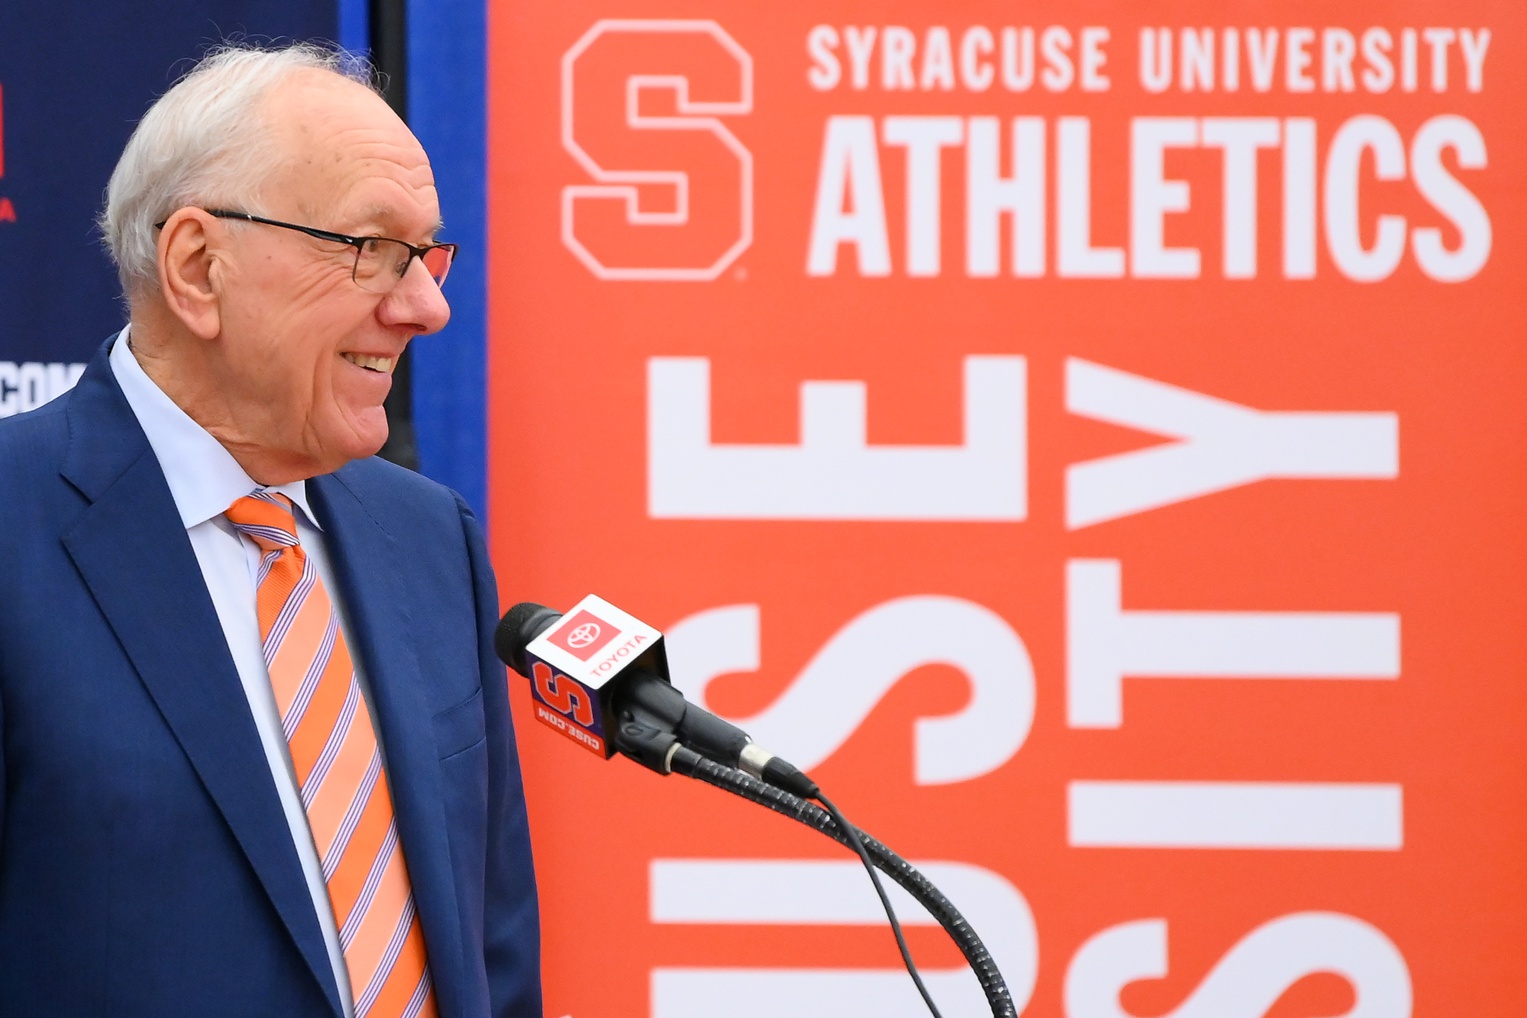 Mar 10, 2023; Syracuse, New York, USA; Former Syracuse Orange head coach Jim Boeheim looks on during a press conference at the Carmelo K. Anthony Basketball Center. Mandatory Credit: Rich Barnes-USA TODAY Sports